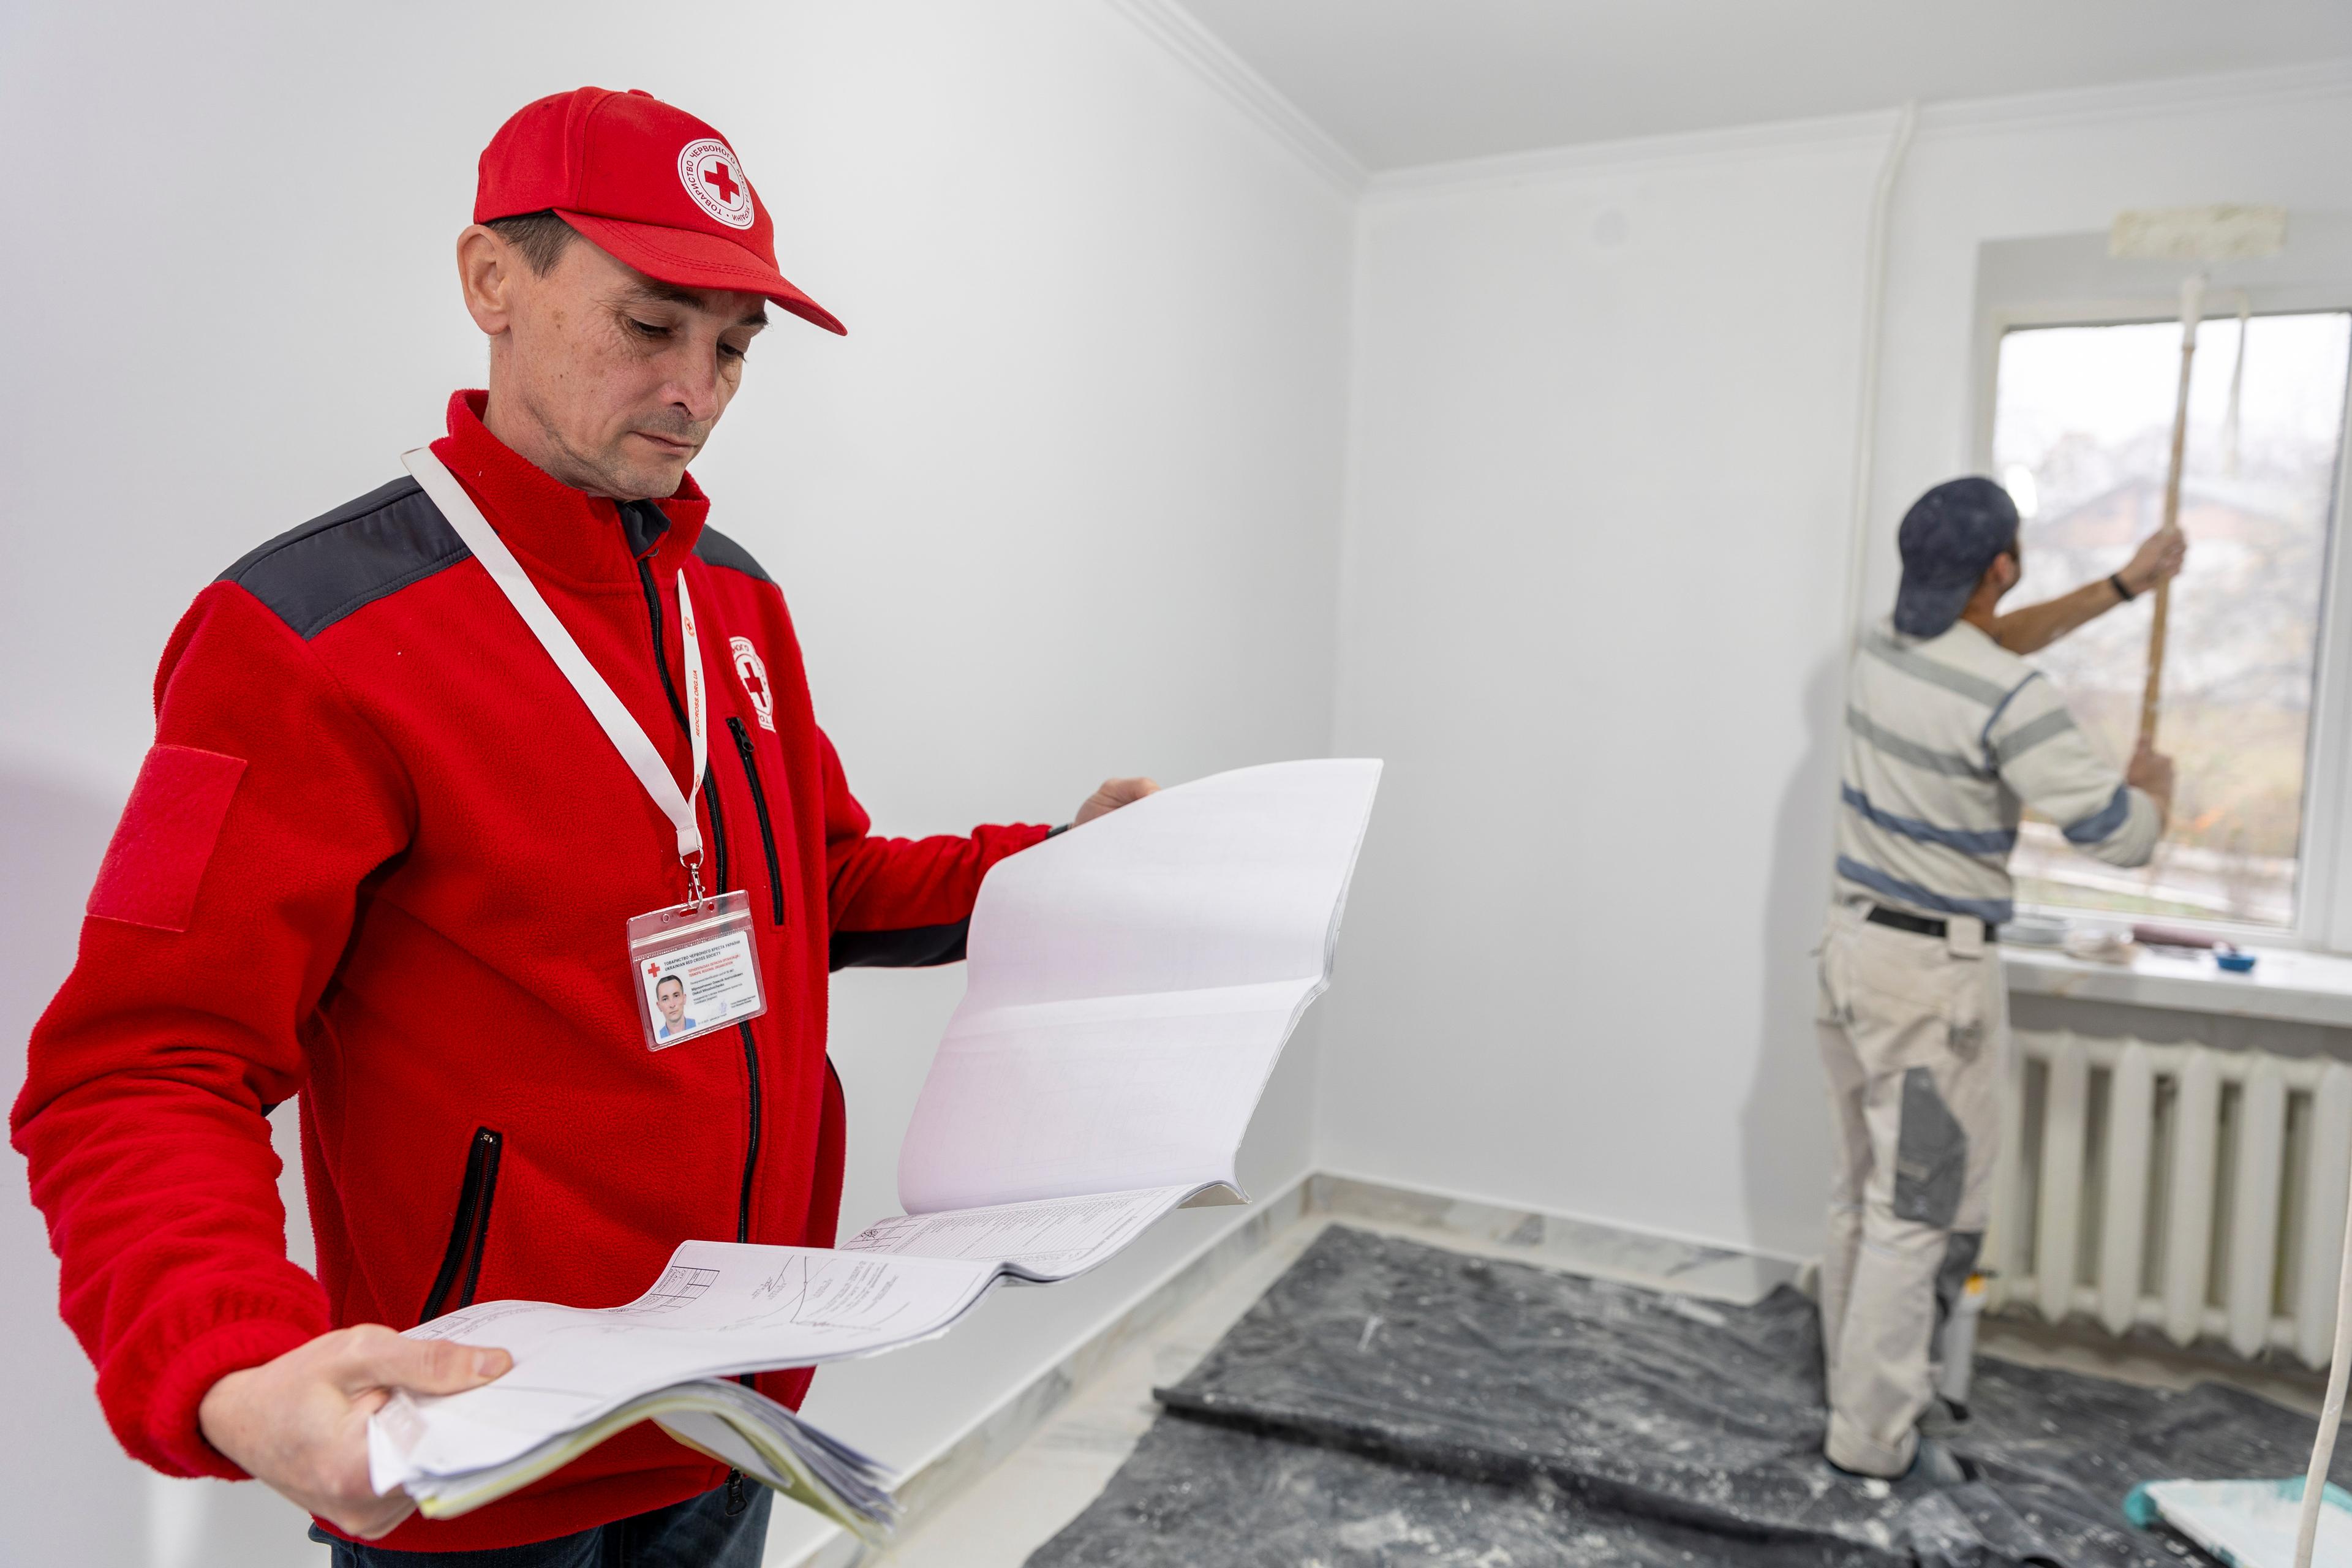 Oleksiy Mirochnichenko (engineer from the Ukrainian Red Cross) inspects the renovation of an elderly home in Petrykiv, Ternopil Oblast, Ukraine. This facility is one the four durable housing solutions supported by the SRC in Western Ukraine. 